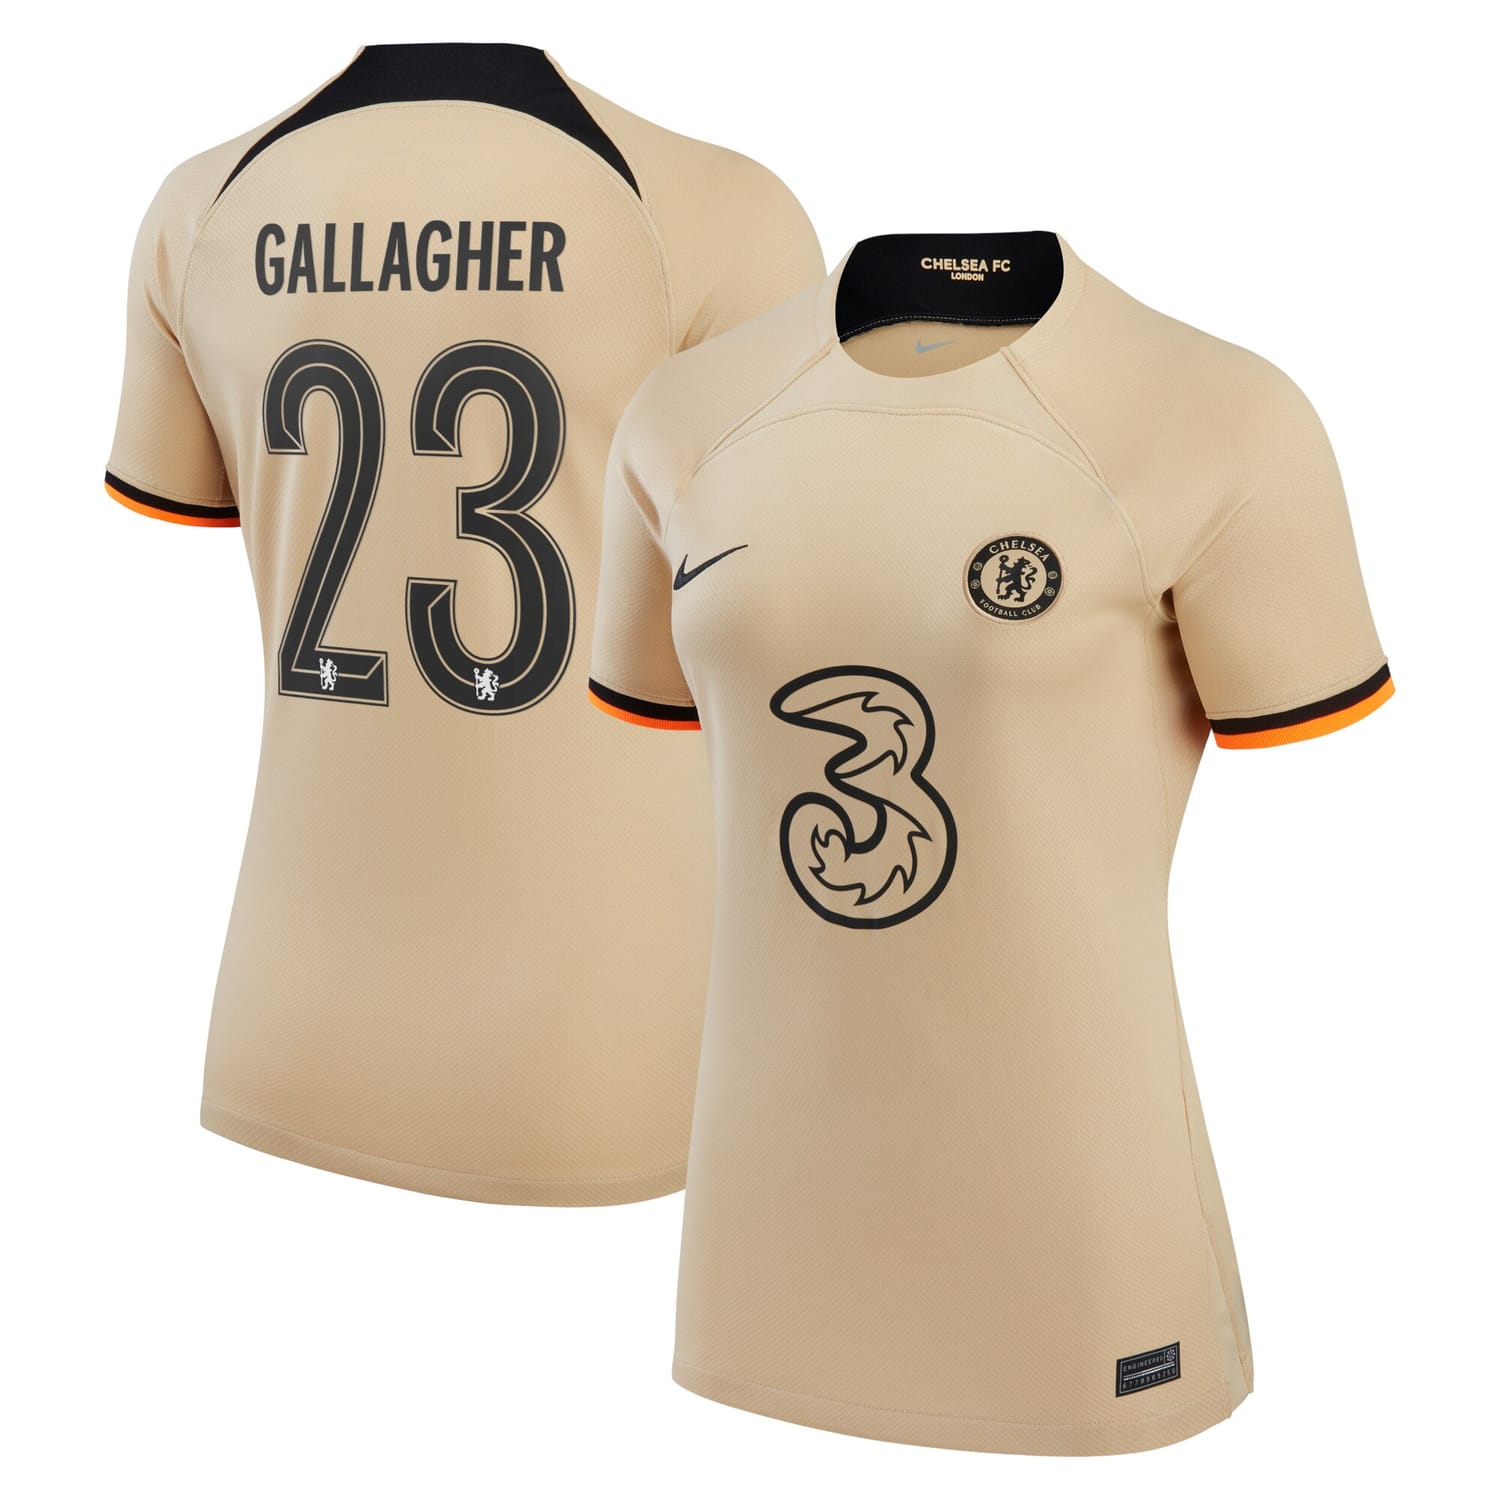 Premier League Chelsea Third Cup Jersey Shirt 2022-23 player Conor Gallagher 23 printing for Women